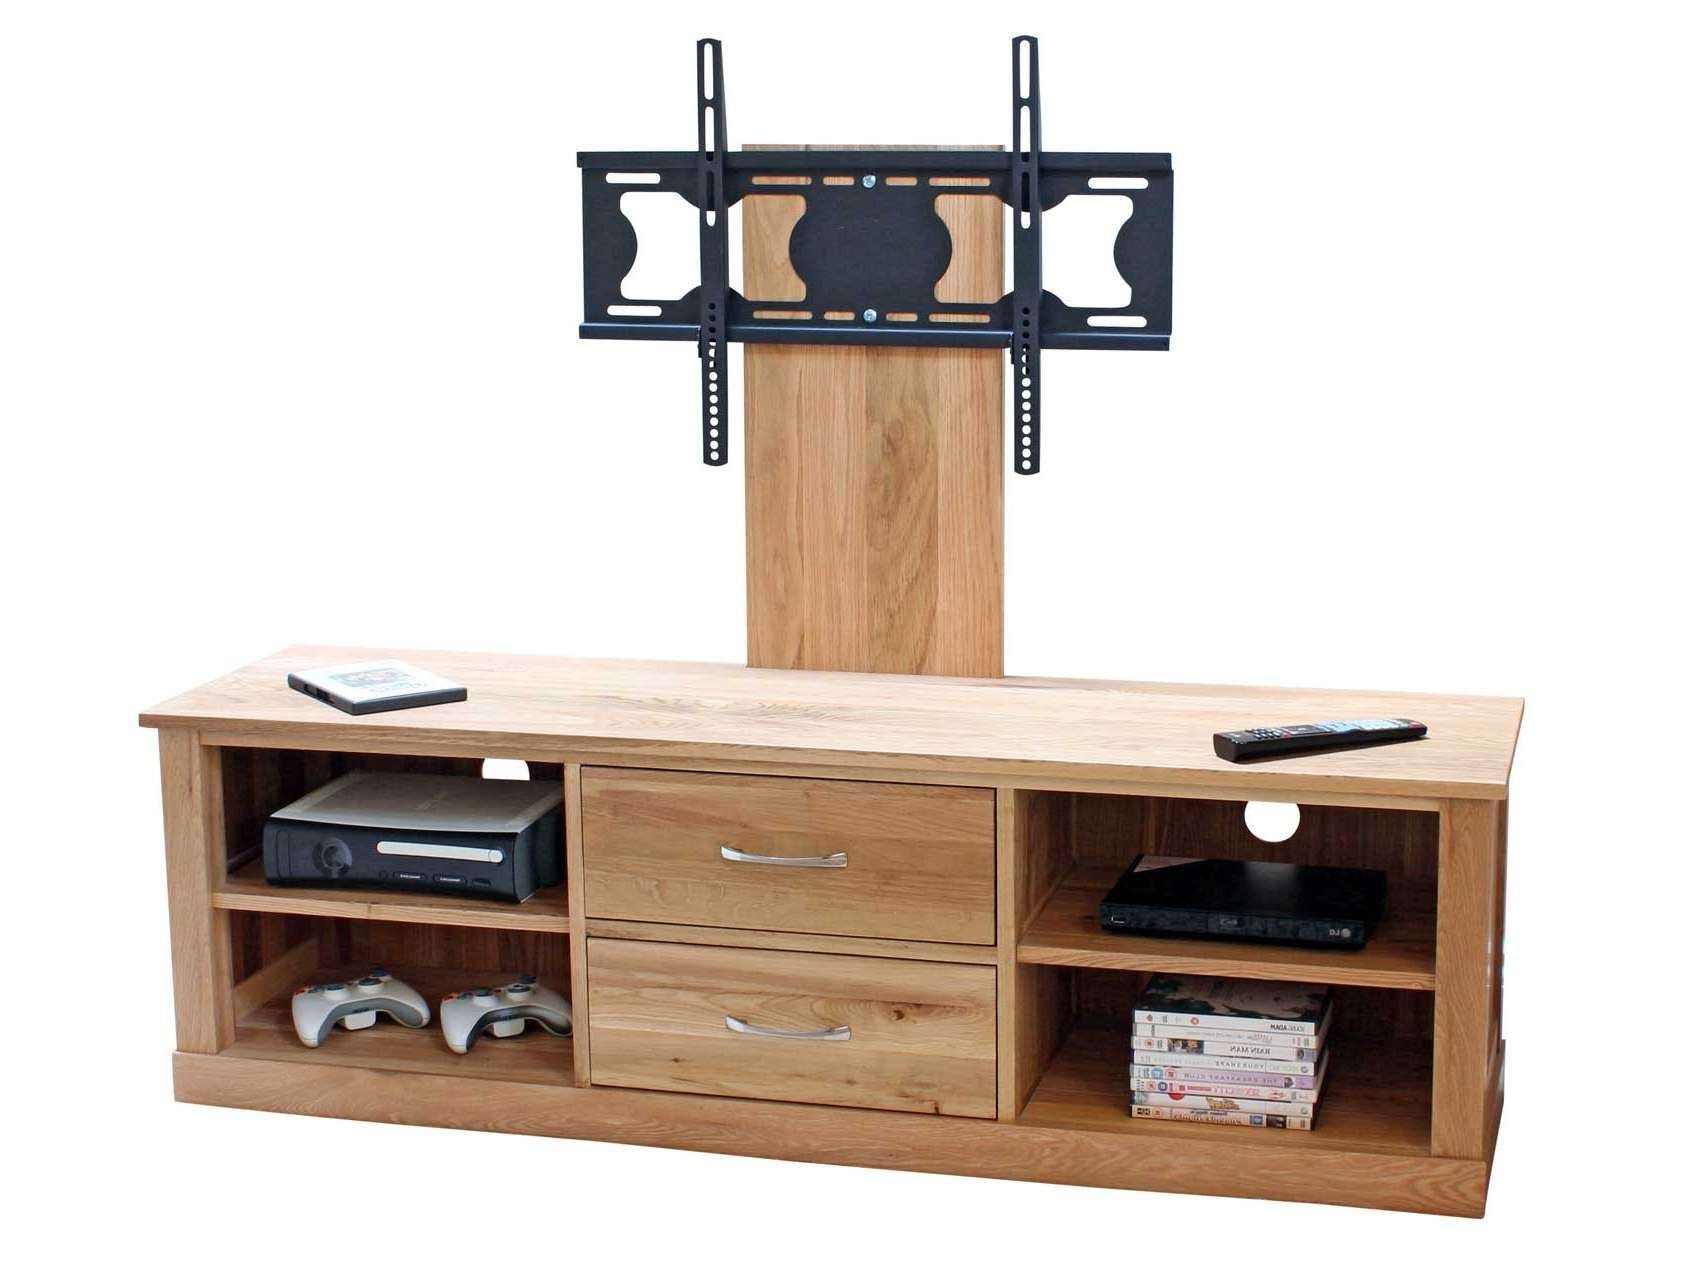 Home Decor: Cool Flat Screen Tv Stands With Mounts Inspiration As With Regard To Cheap Wood Tv Stands (View 15 of 15)